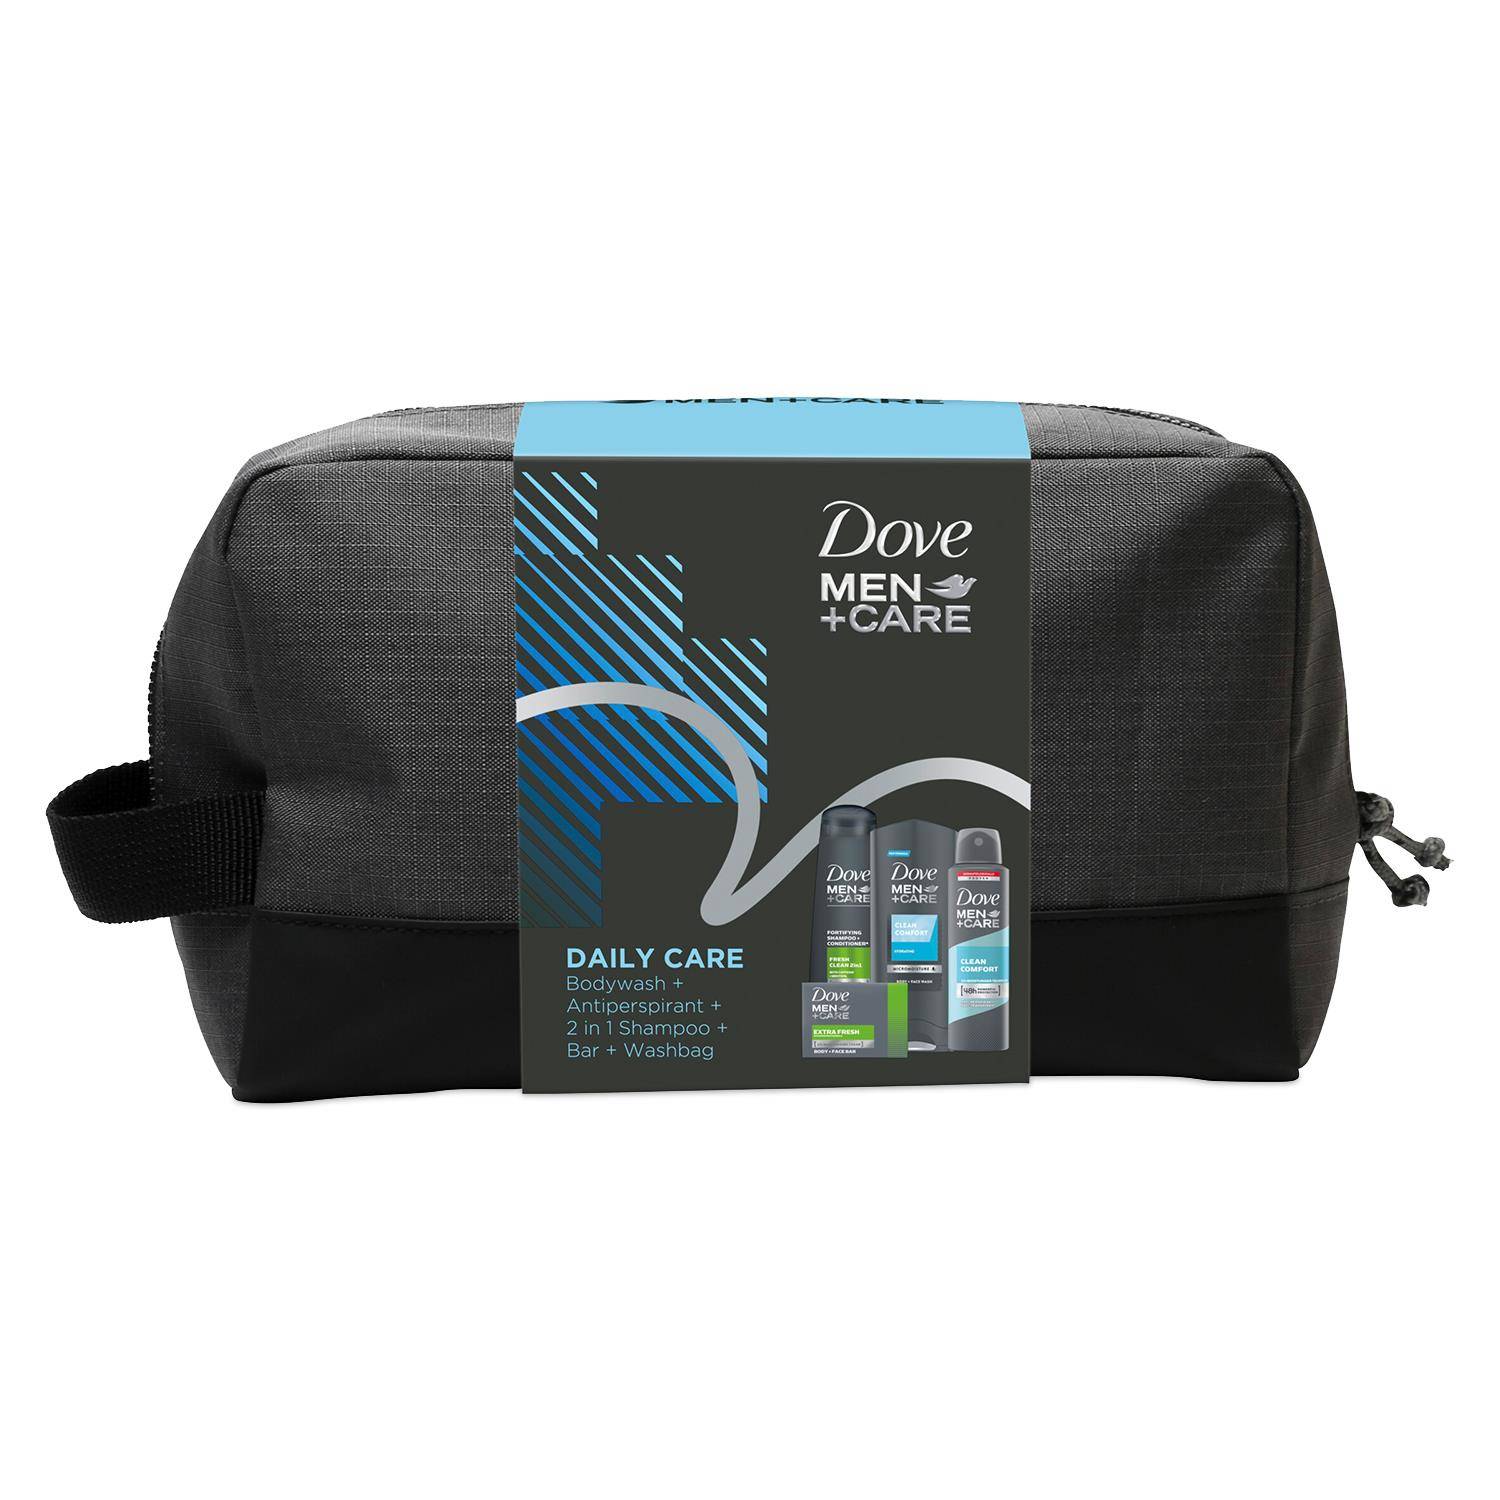 Dove Men Daily Care Body & Bath Essentials 4pcs Gift Set For Men with Wash Bag